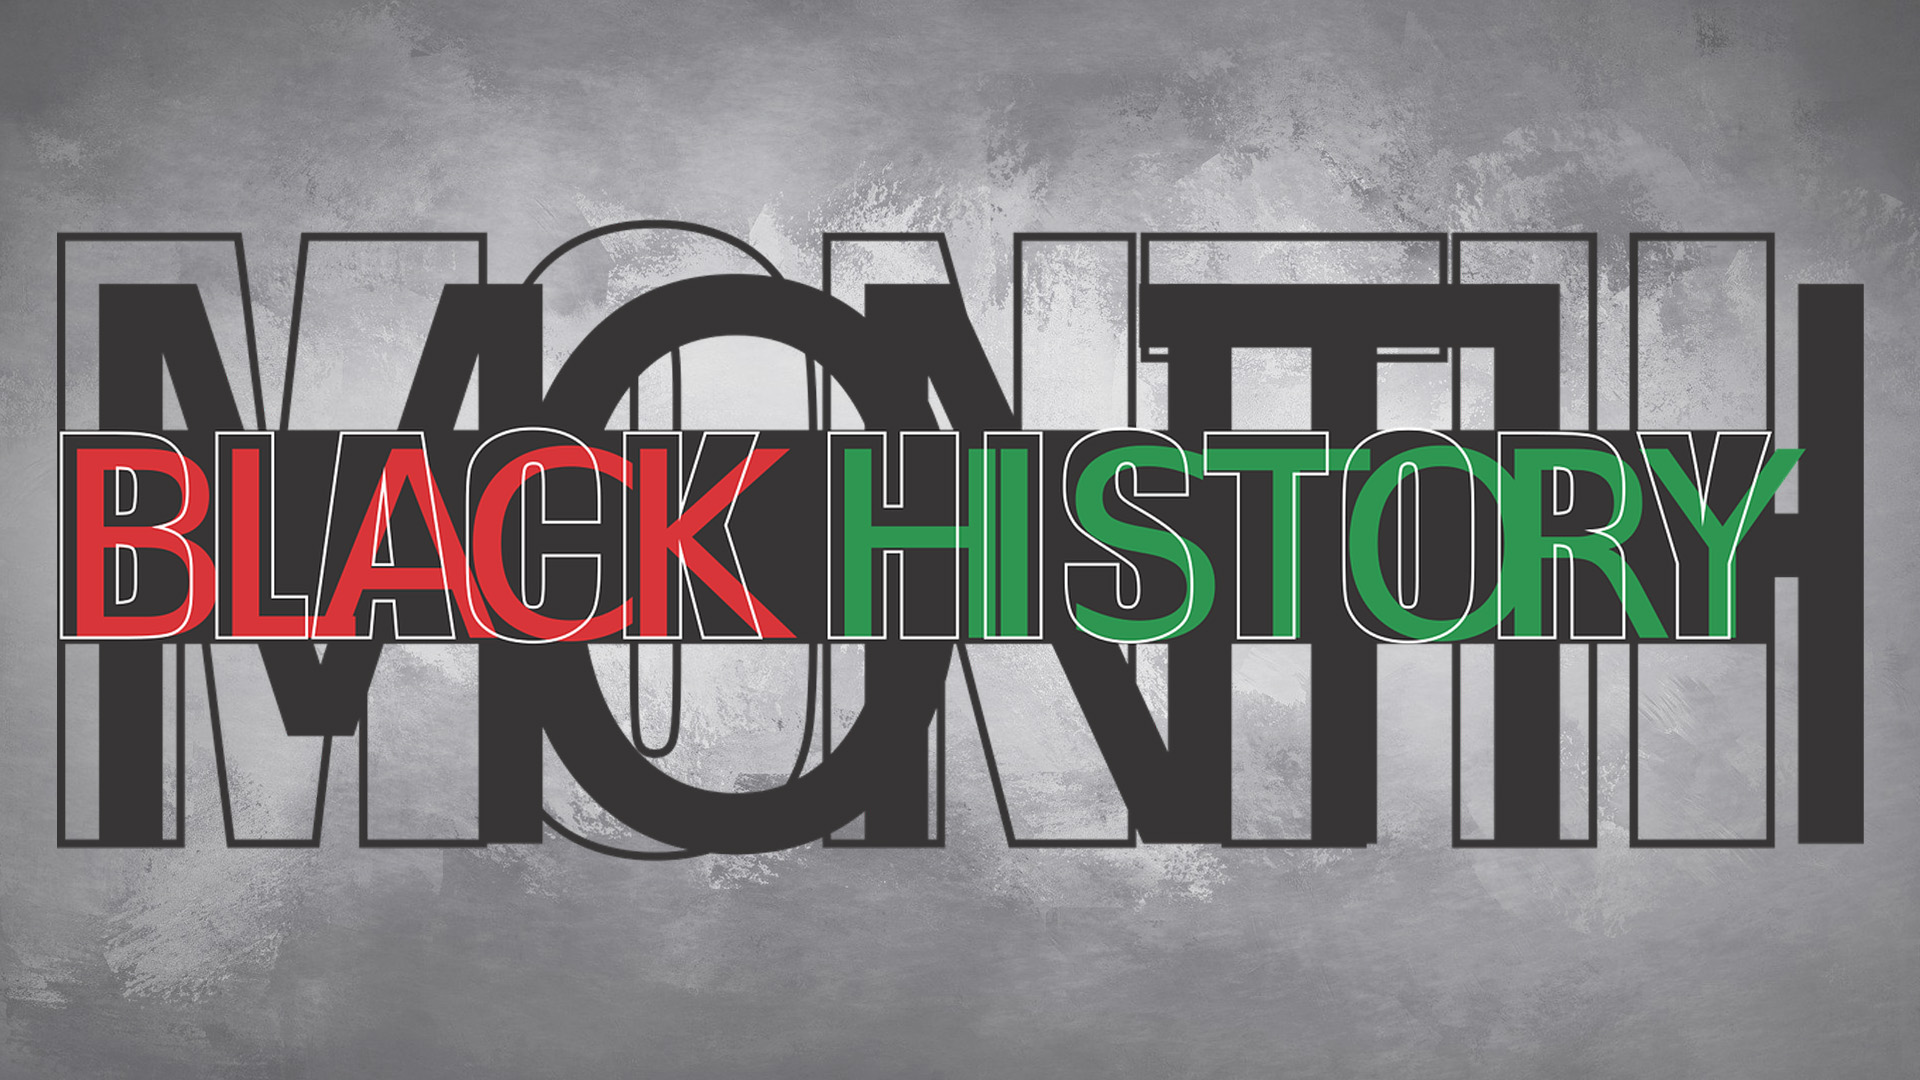 Grey grunge background with black, green, and red overlapping text spelling out Black History Month